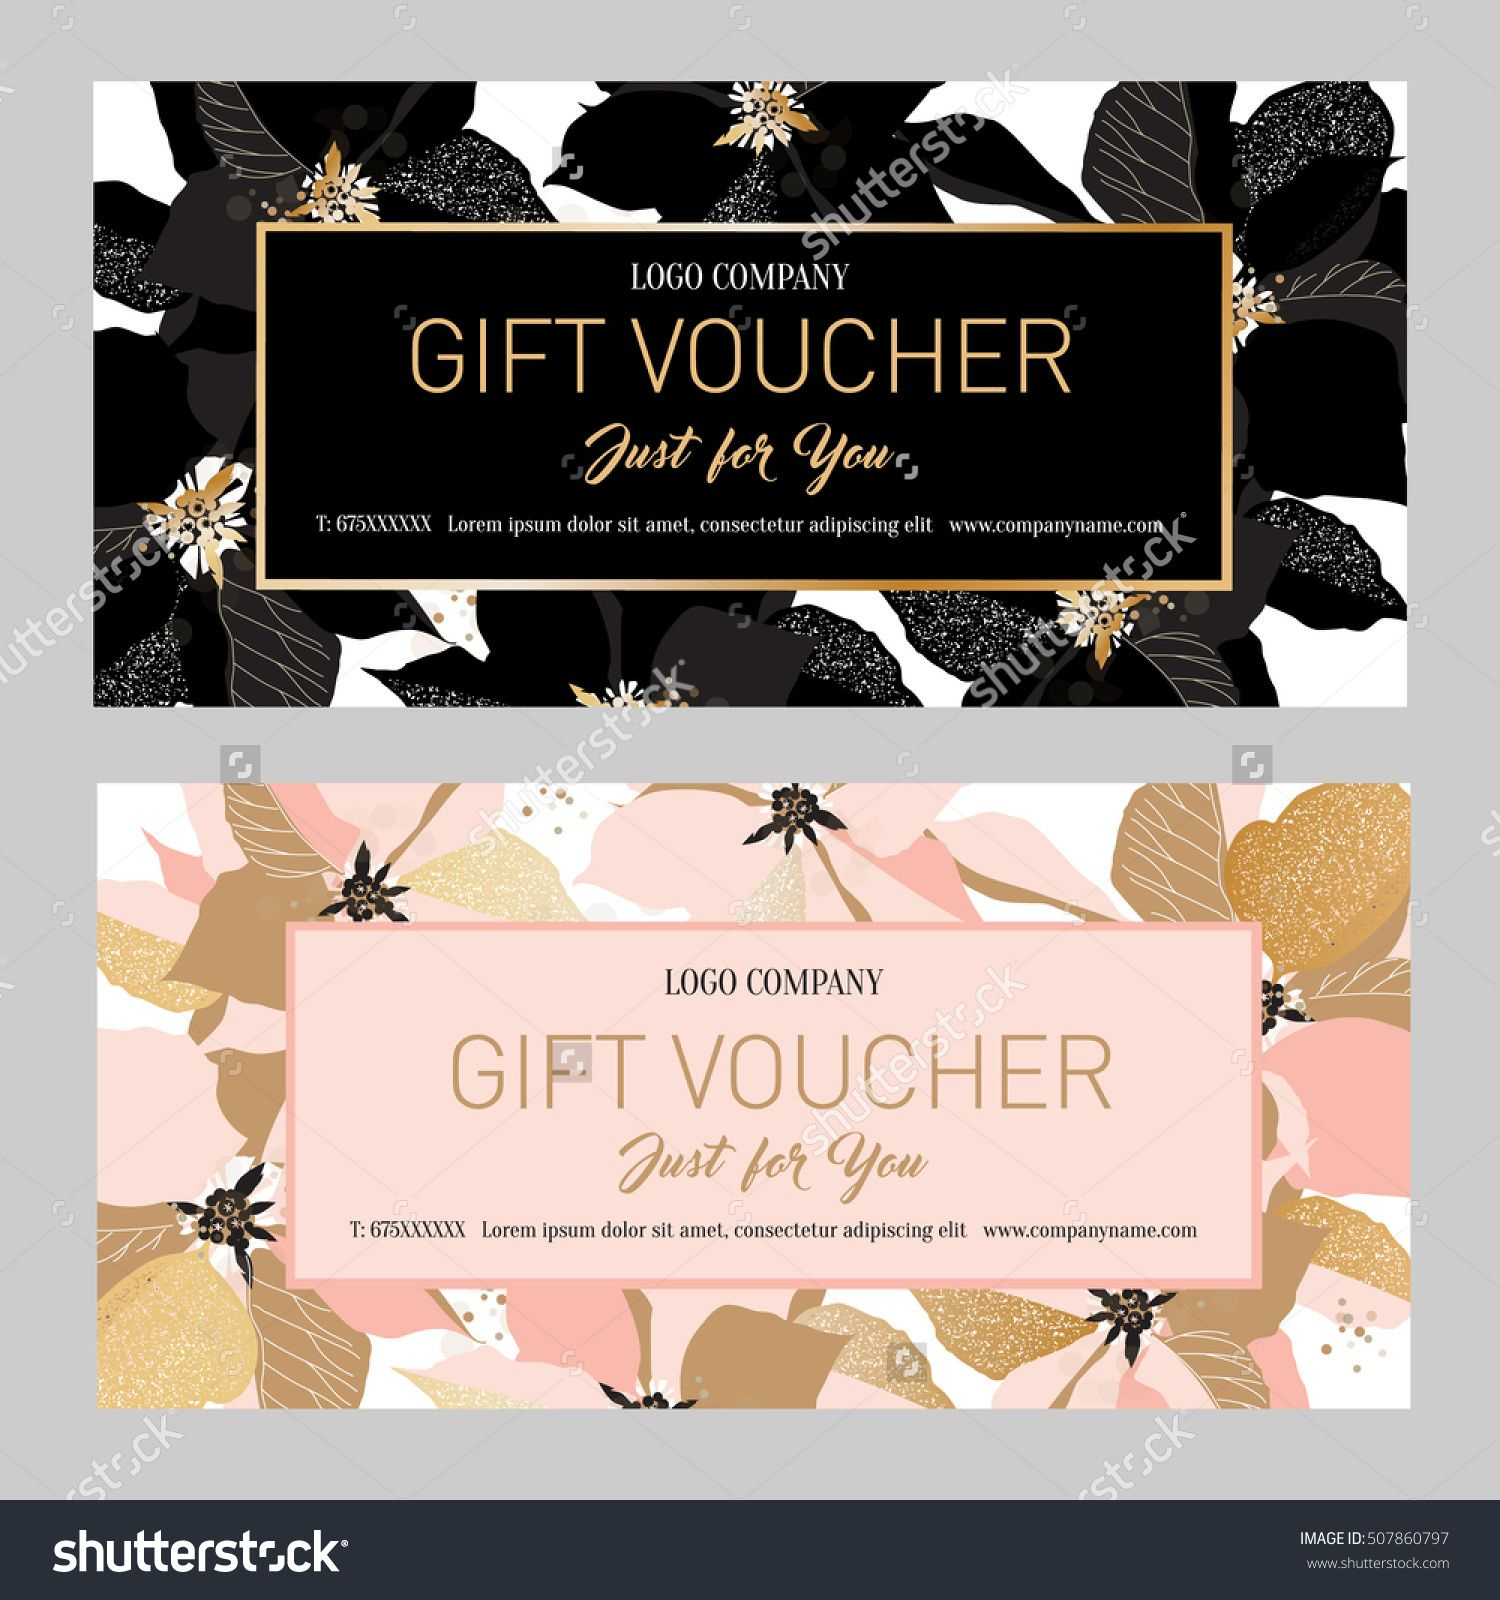 Gift Premium Certificate. Gift Card. Gift Voucher. Coupon With Regard To Salon Gift Certificate Template